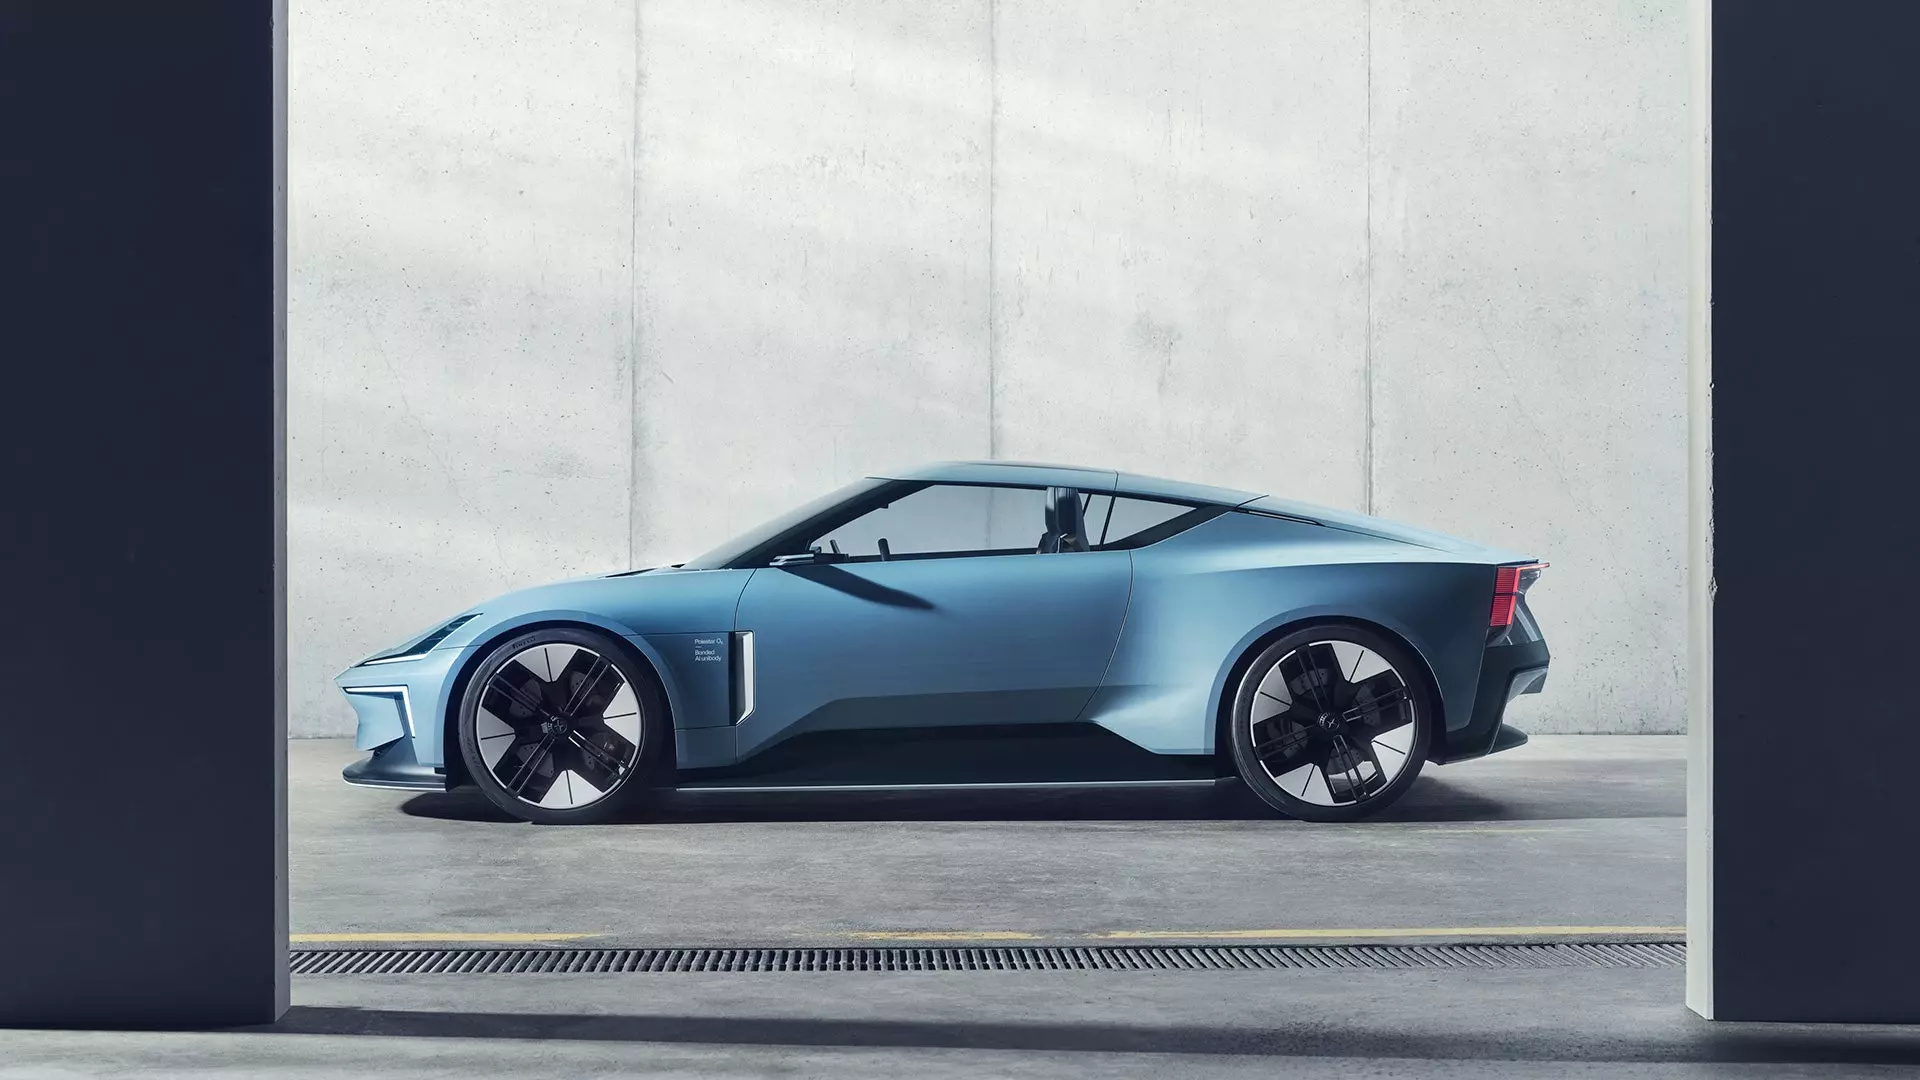 Without an Engine, the Polestar O2 Has Room for a Retractable Roof and a Drone